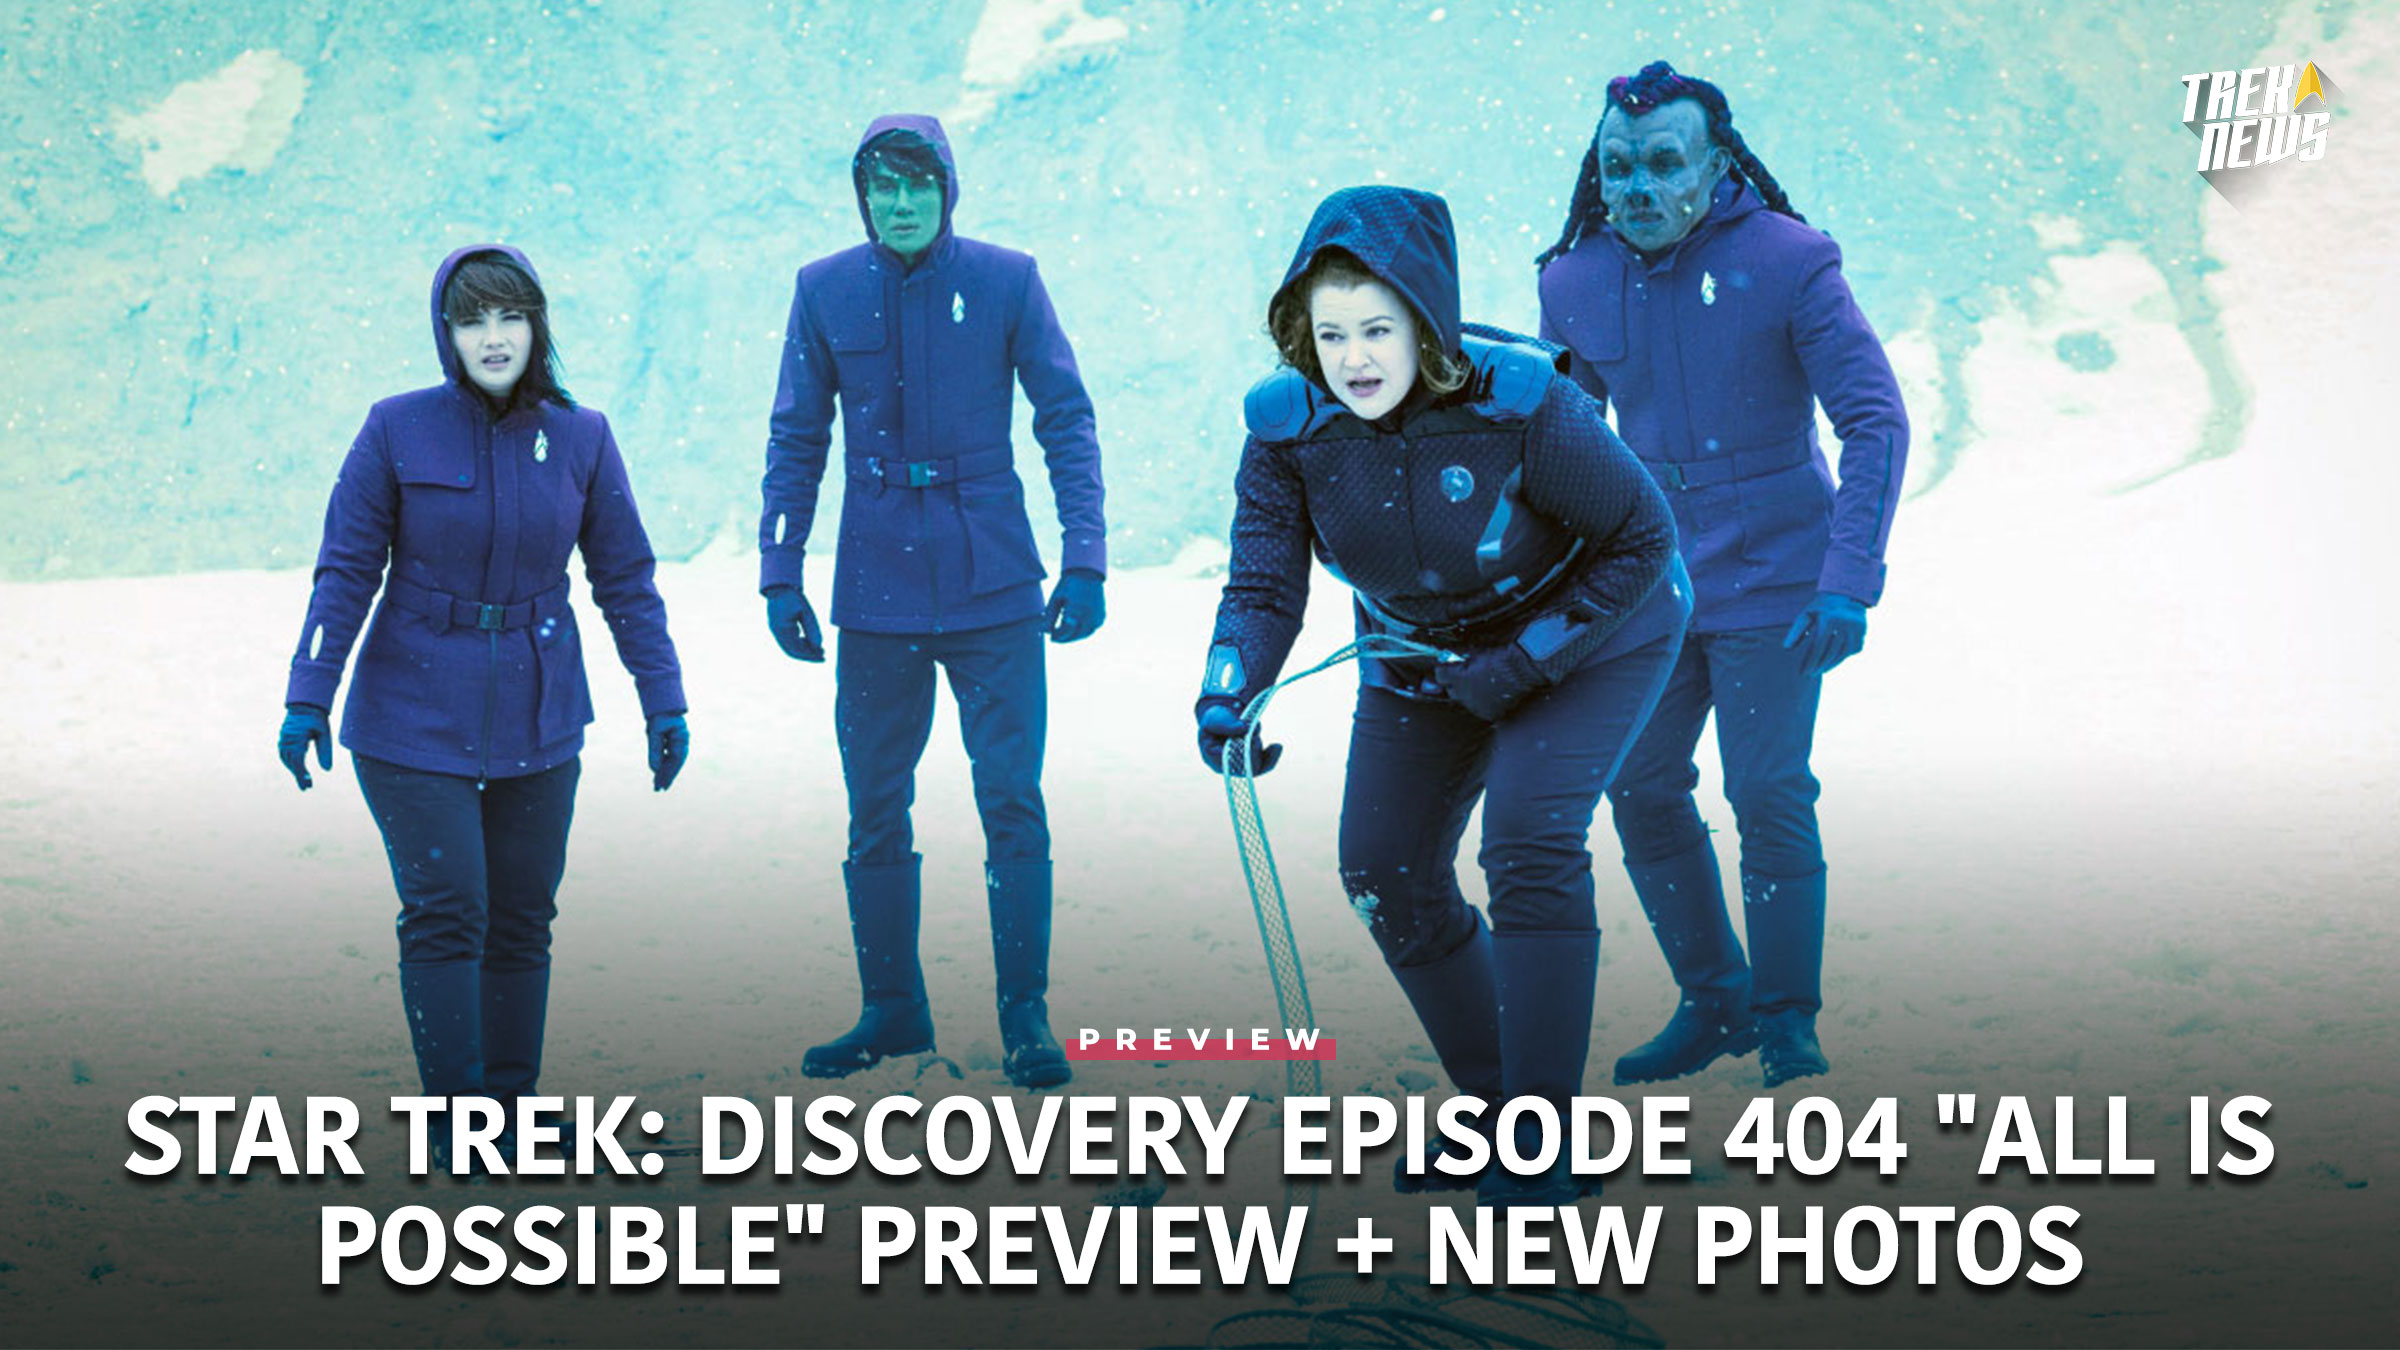 Star Trek: Discovery Episode 404 “All Is Possible” Preview + New Photos